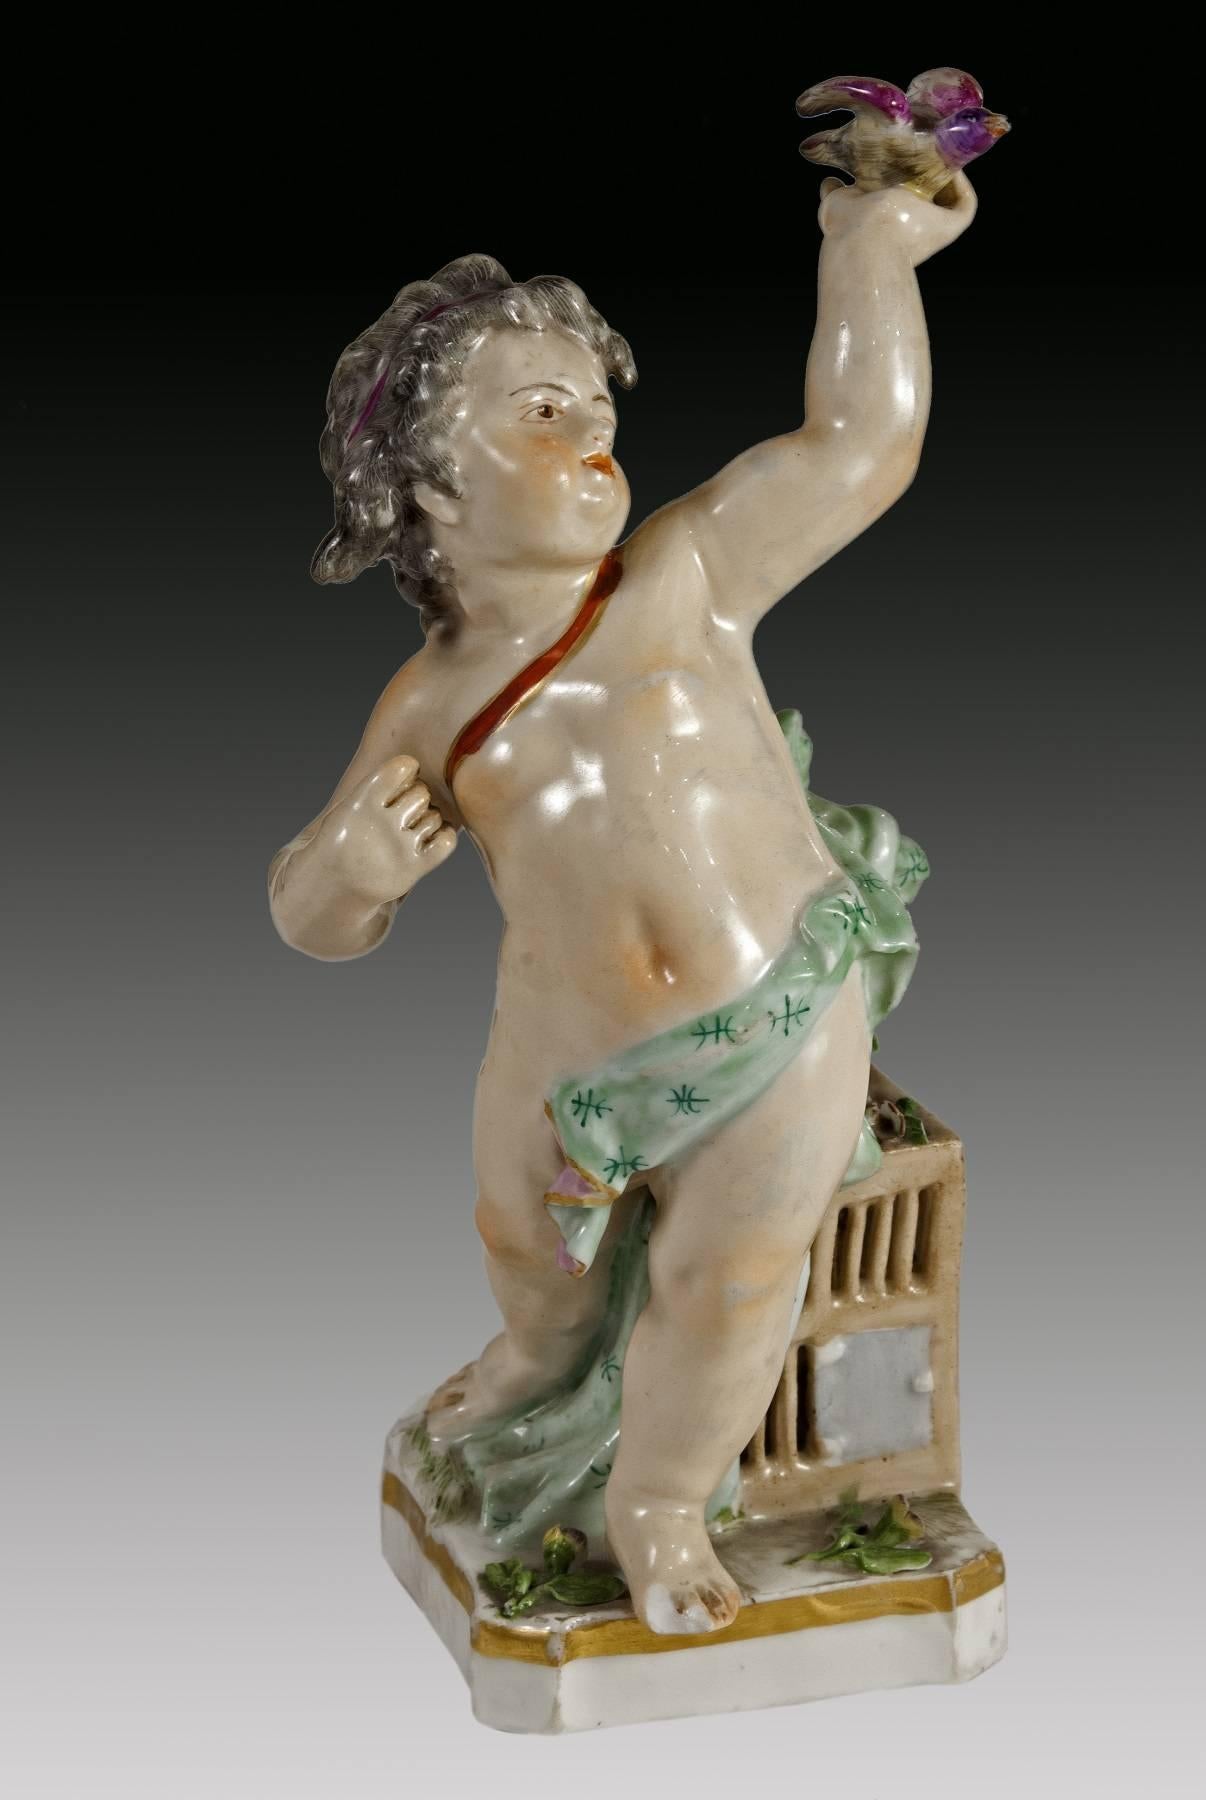 Brand of the Royal Porcelain Factory of El Buen Retiro at the base.
Located on fine square pedestals, the three figures have been located. The three children appear seminaked, their fronts decorated with bands and accompanied by various elements: